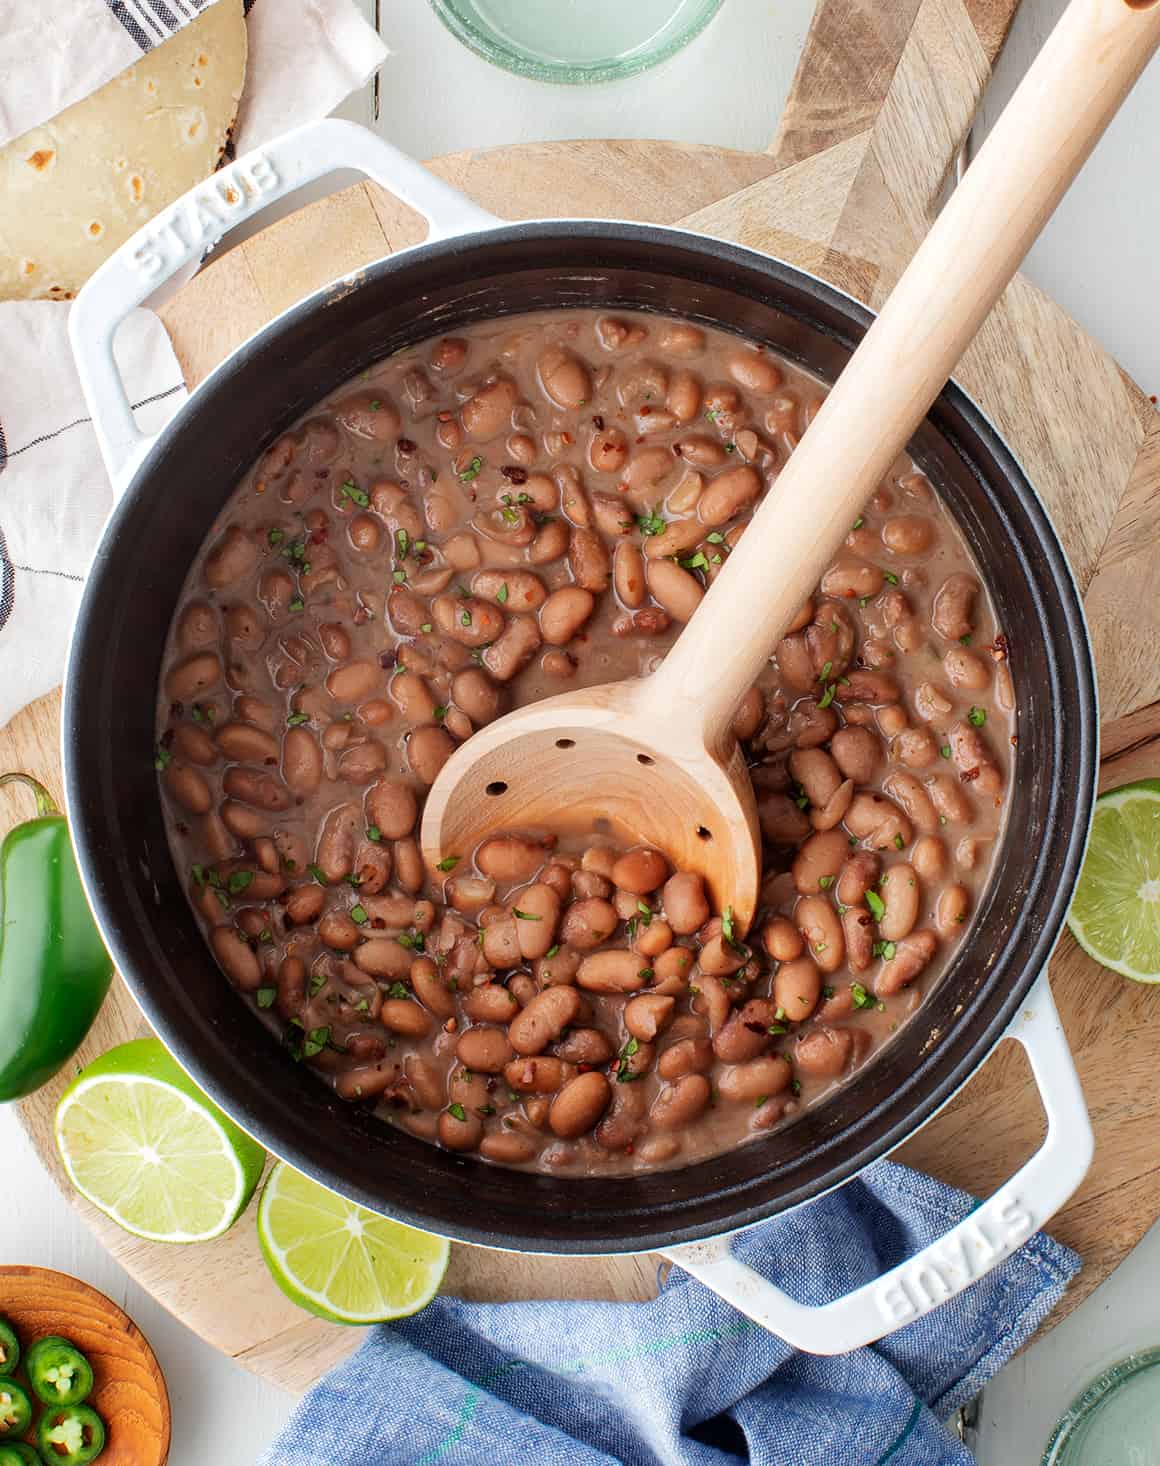 How Long Does It Take To Cook Pinto Beans In An Electric Pressure Cooker